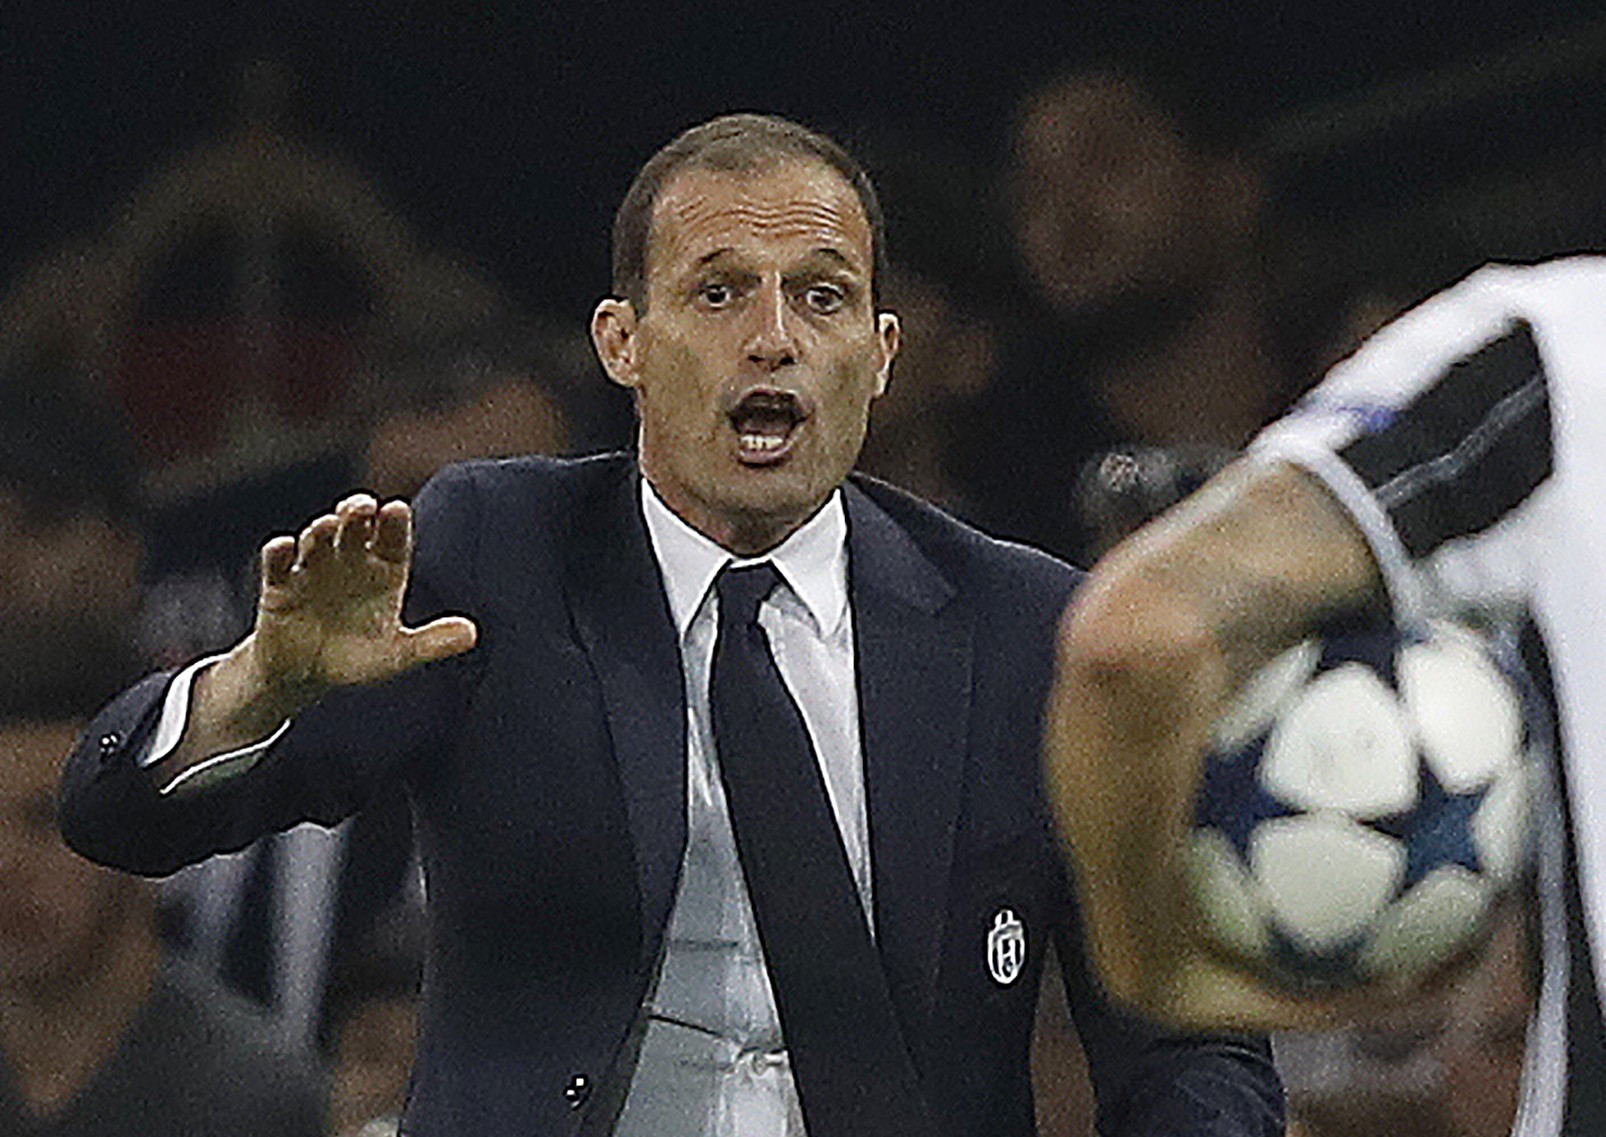 Juventus' manager Massimiliano Allegri (L) gestures to Juventus' Italian defender Leonardo Bonucci during the UEFA Champions League final football match between Juventus and Real Madrid at The Principality Stadium in Cardiff, south Wales, on June 3, 2017. / AFP PHOTO / Adrian DENNIS        (Photo credit should read ADRIAN DENNIS/AFP/Getty Images)